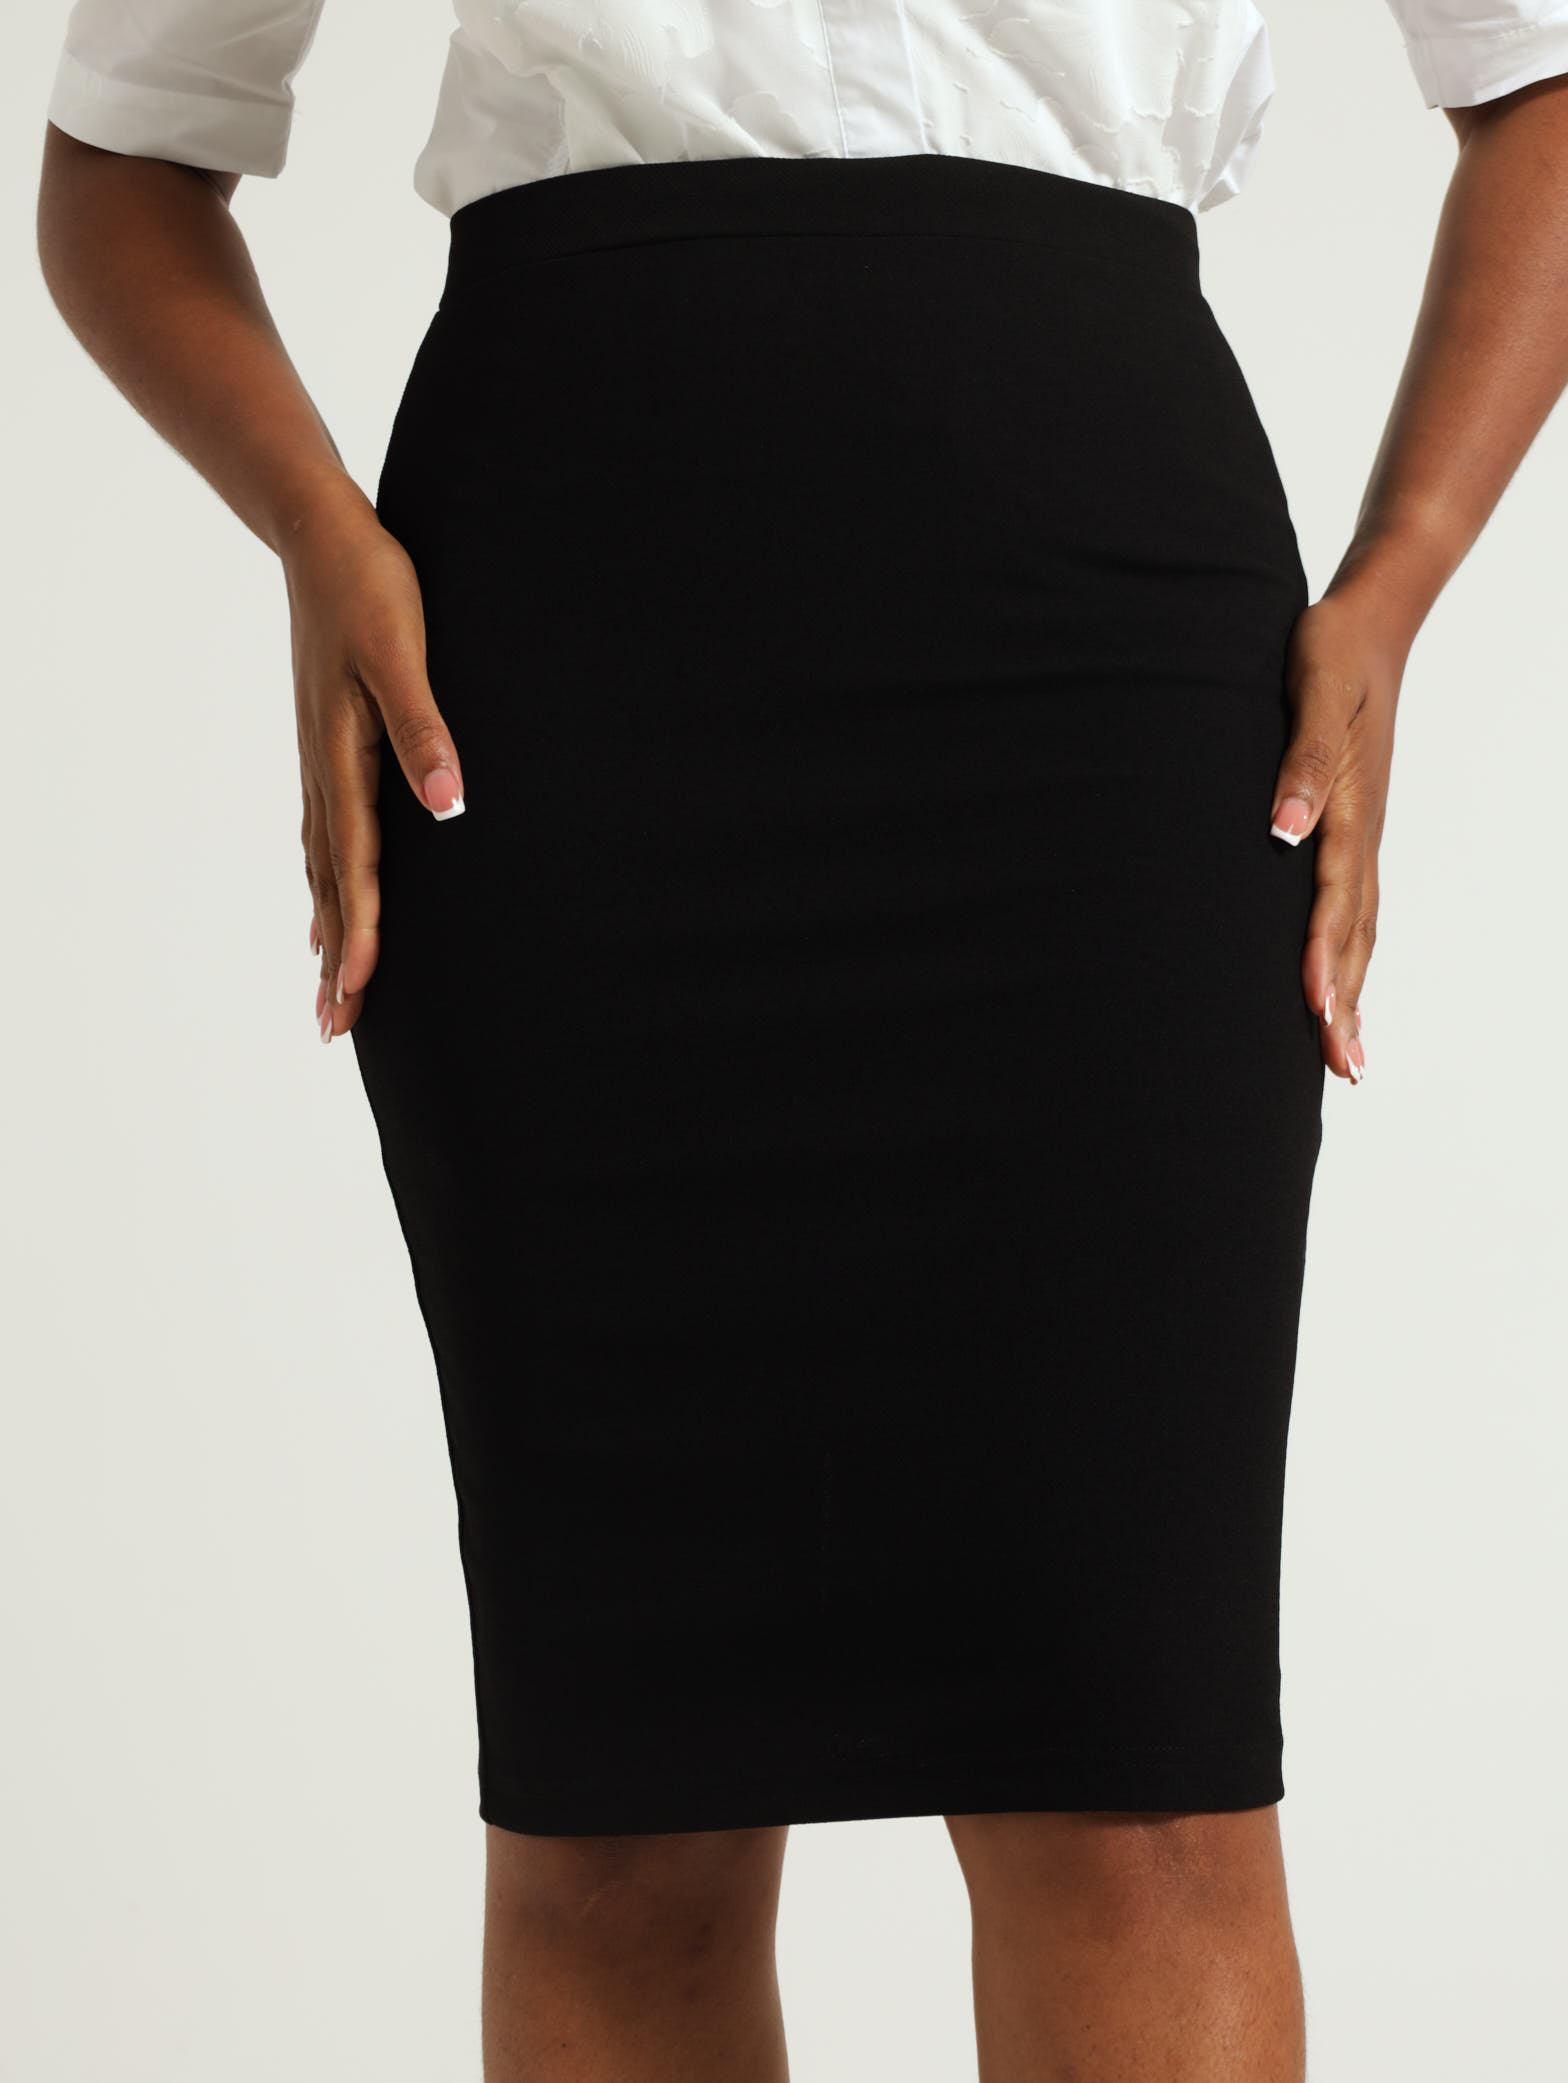 Comfy Skirt by Texture Clothing